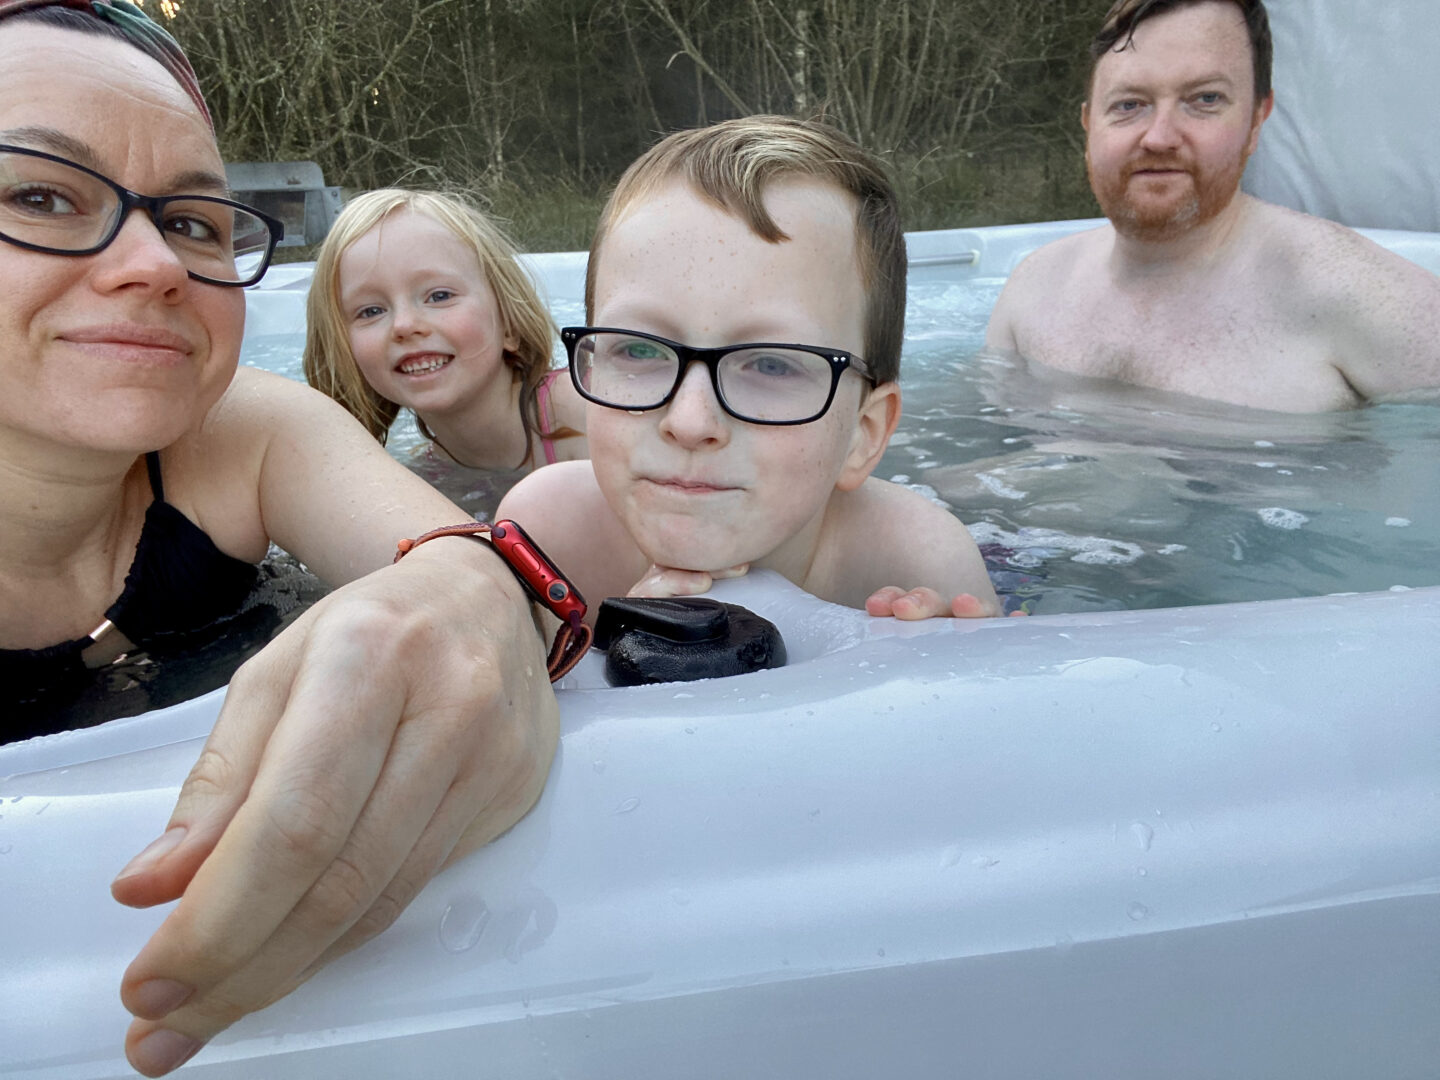 A family of 4 in a hot tub